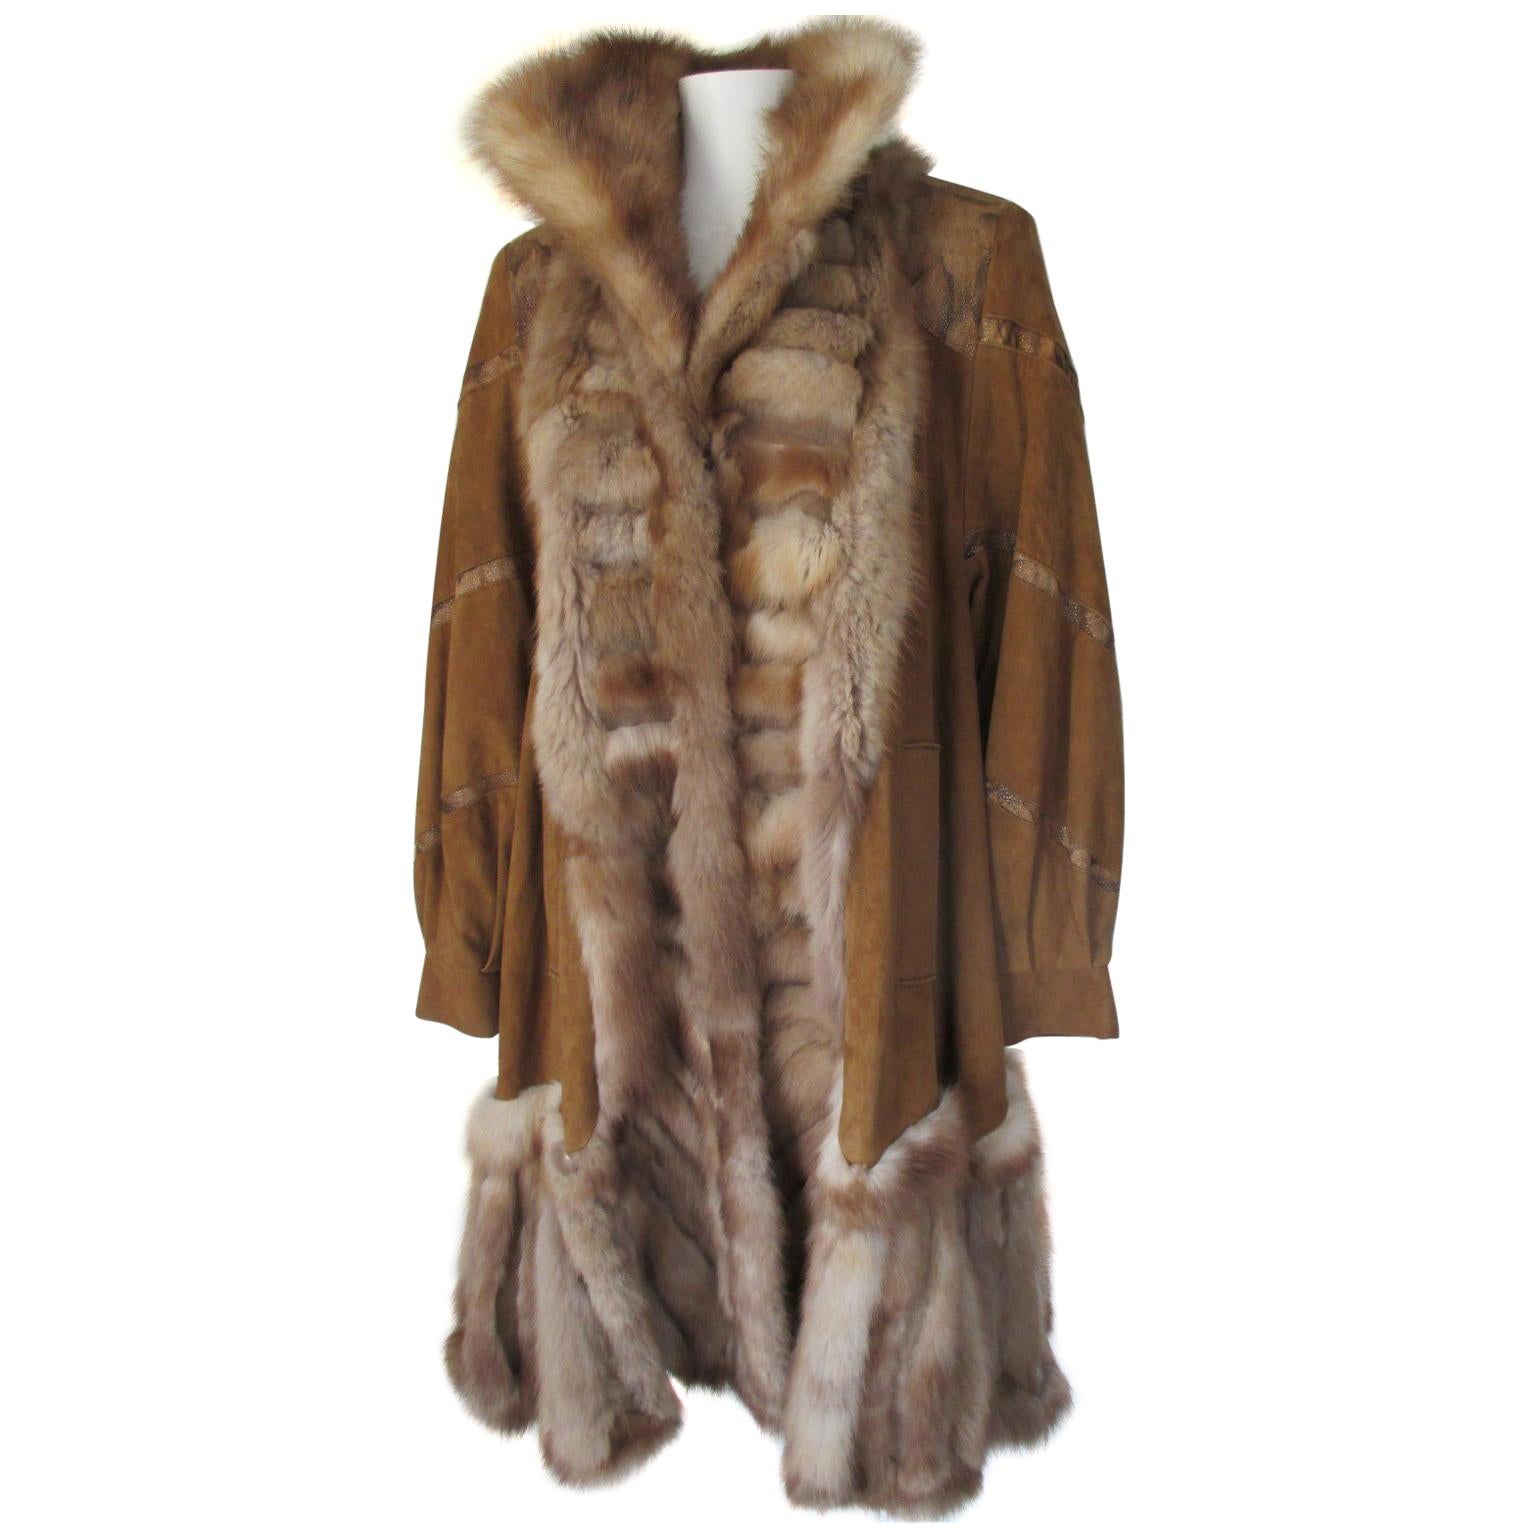 Sable Fur Swing Coat with brown soft leather